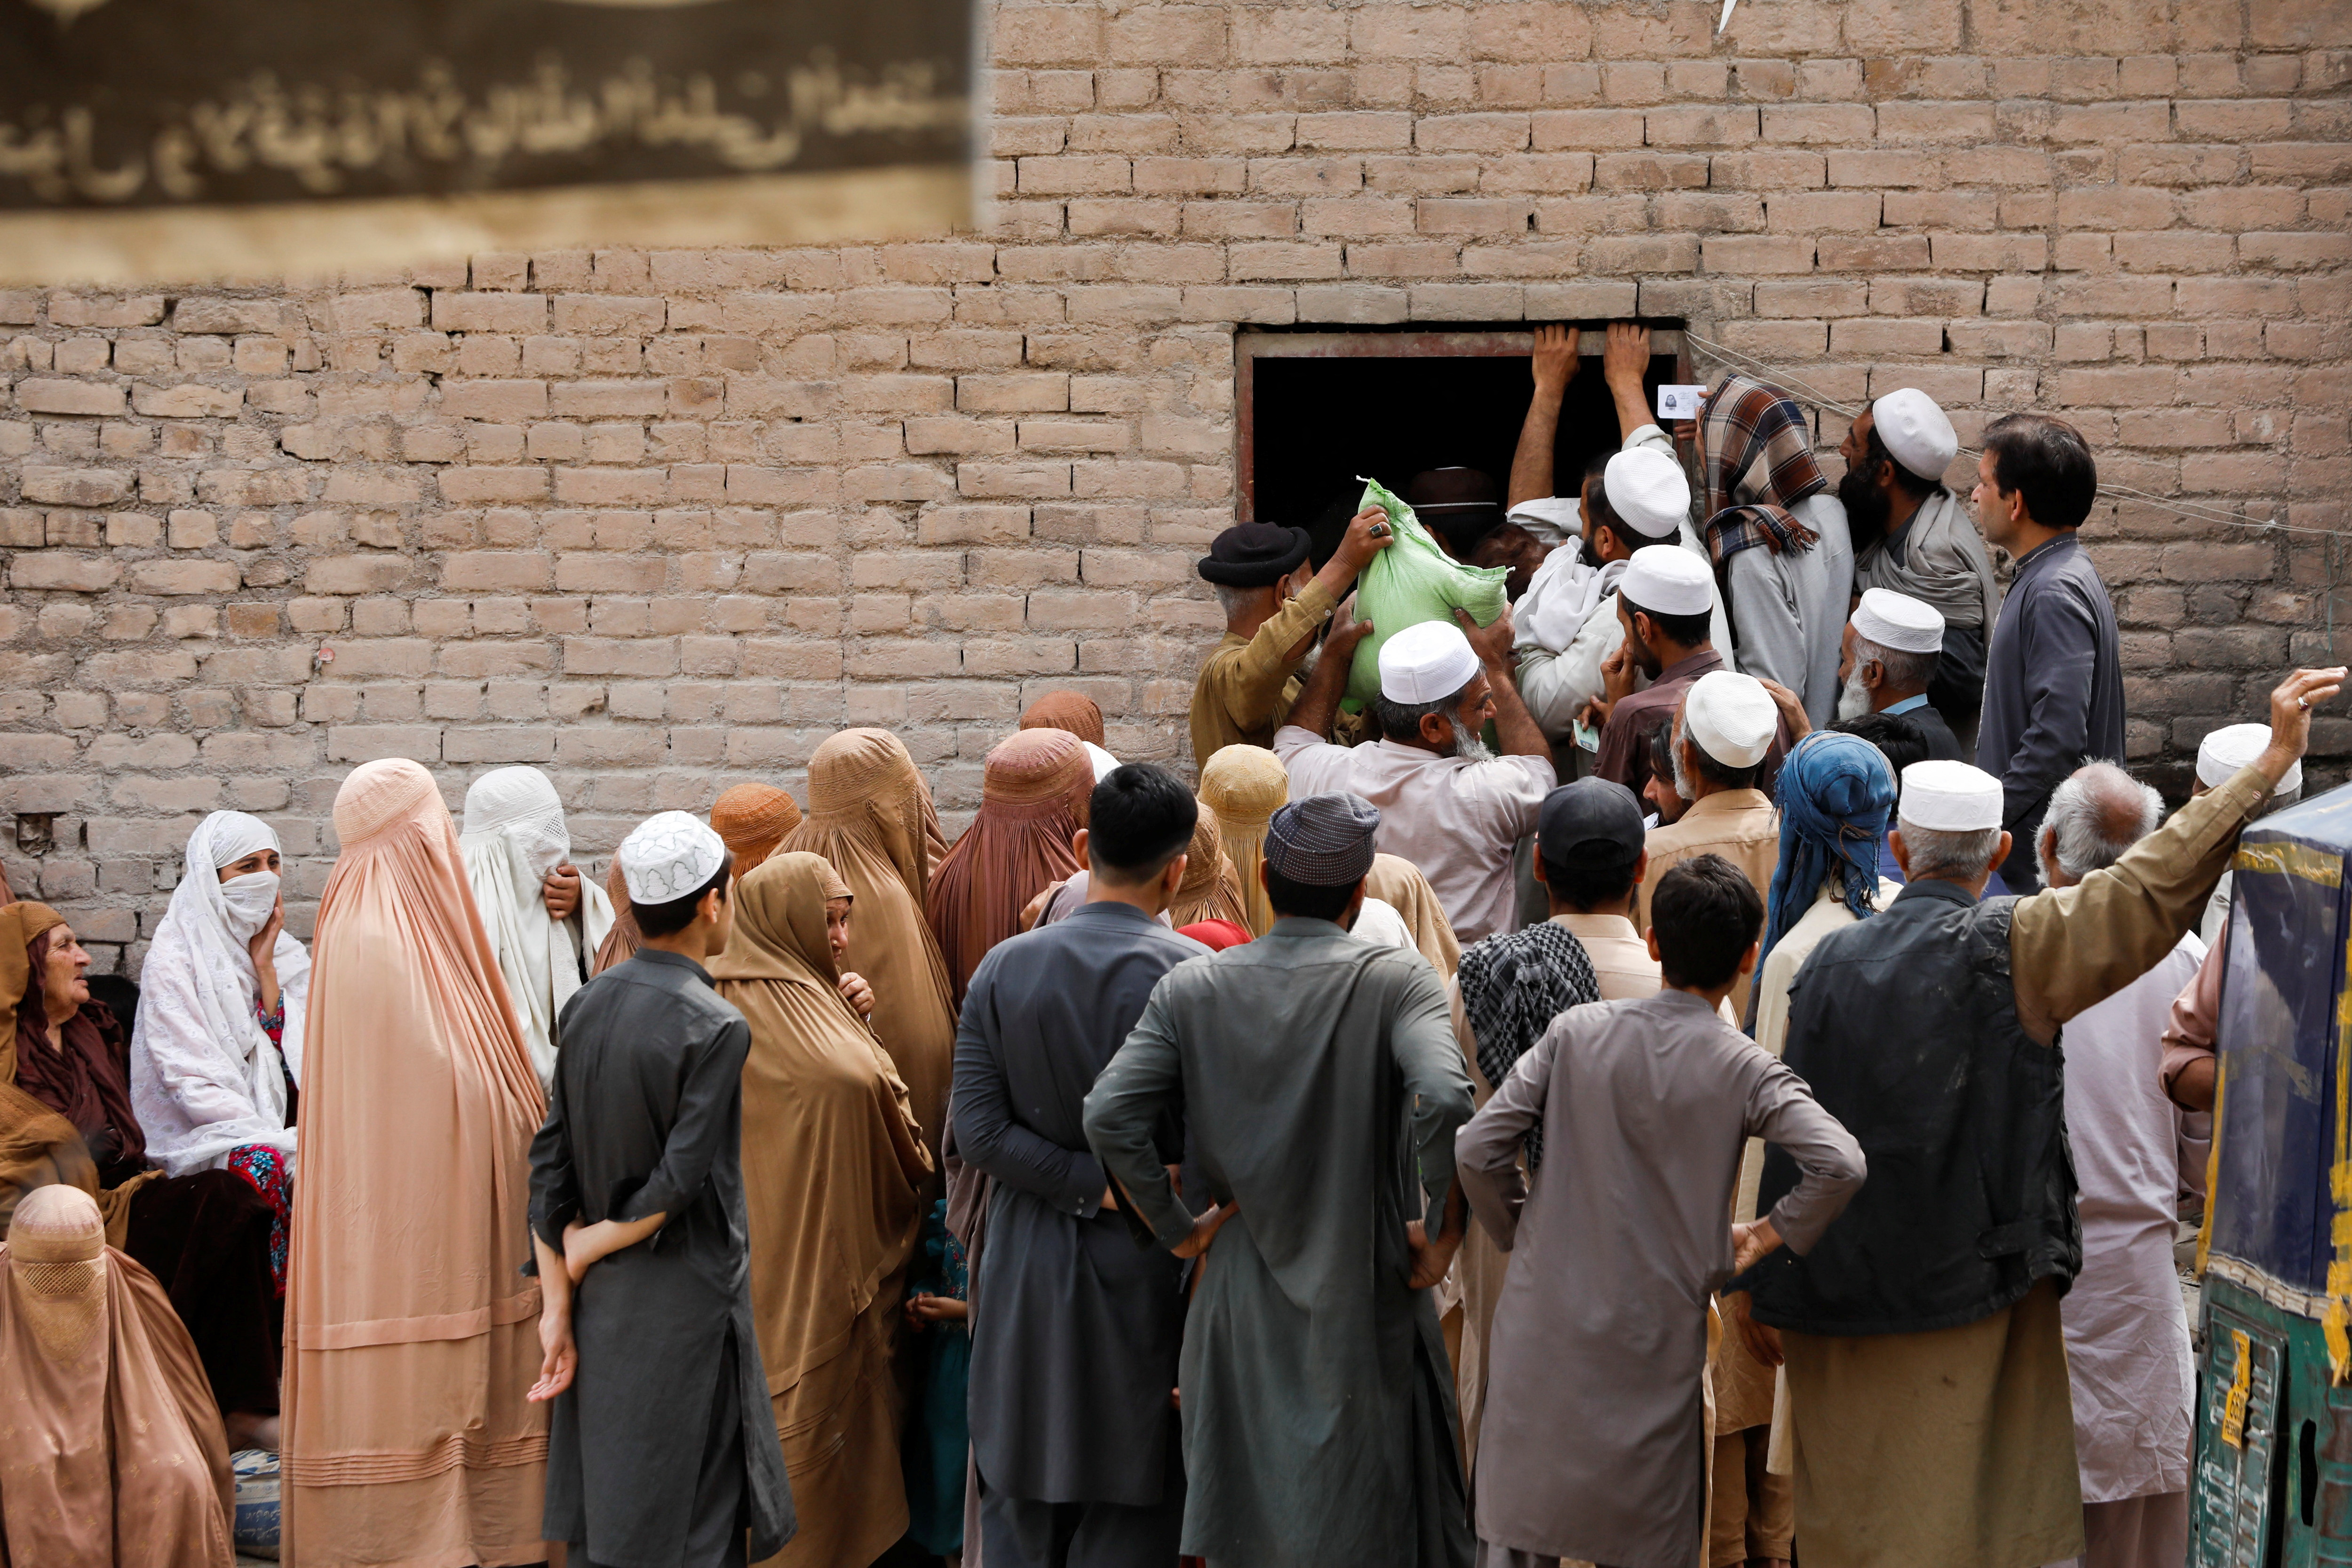 People gather to receive sacks of free flour, at a distribution point in Peshawar